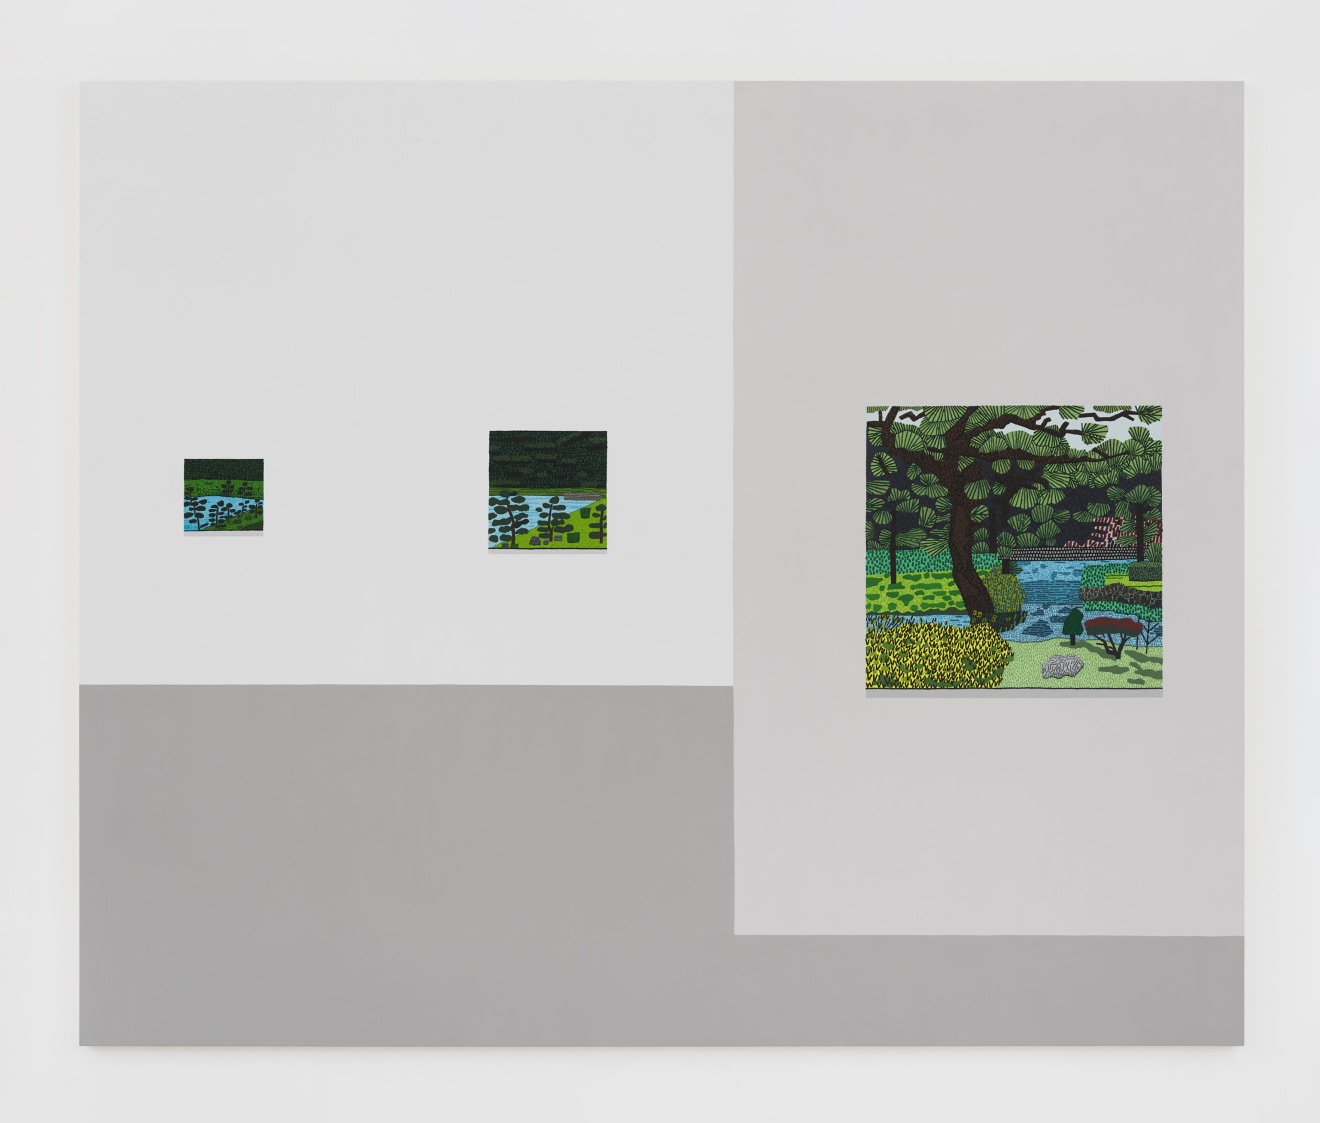 Jonas Wood, Interior with Japanese Landscapes, 2022